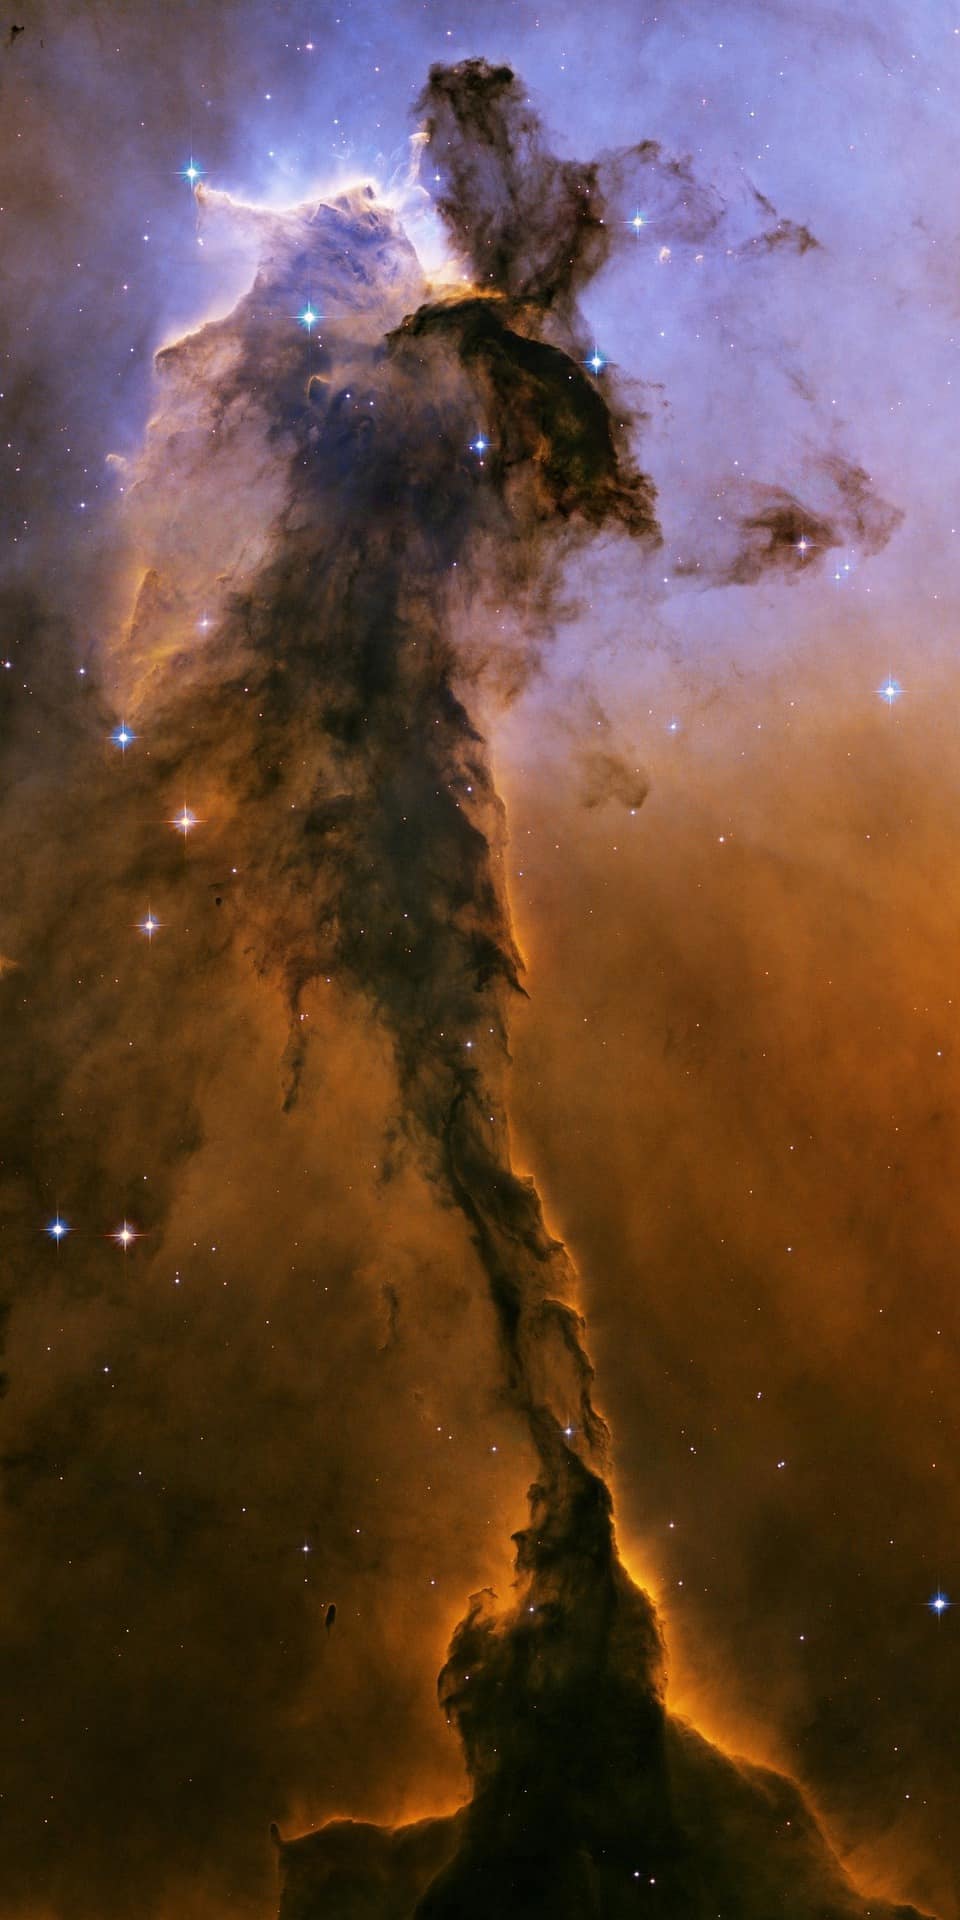 The Eagle Nebula in the Milky Way